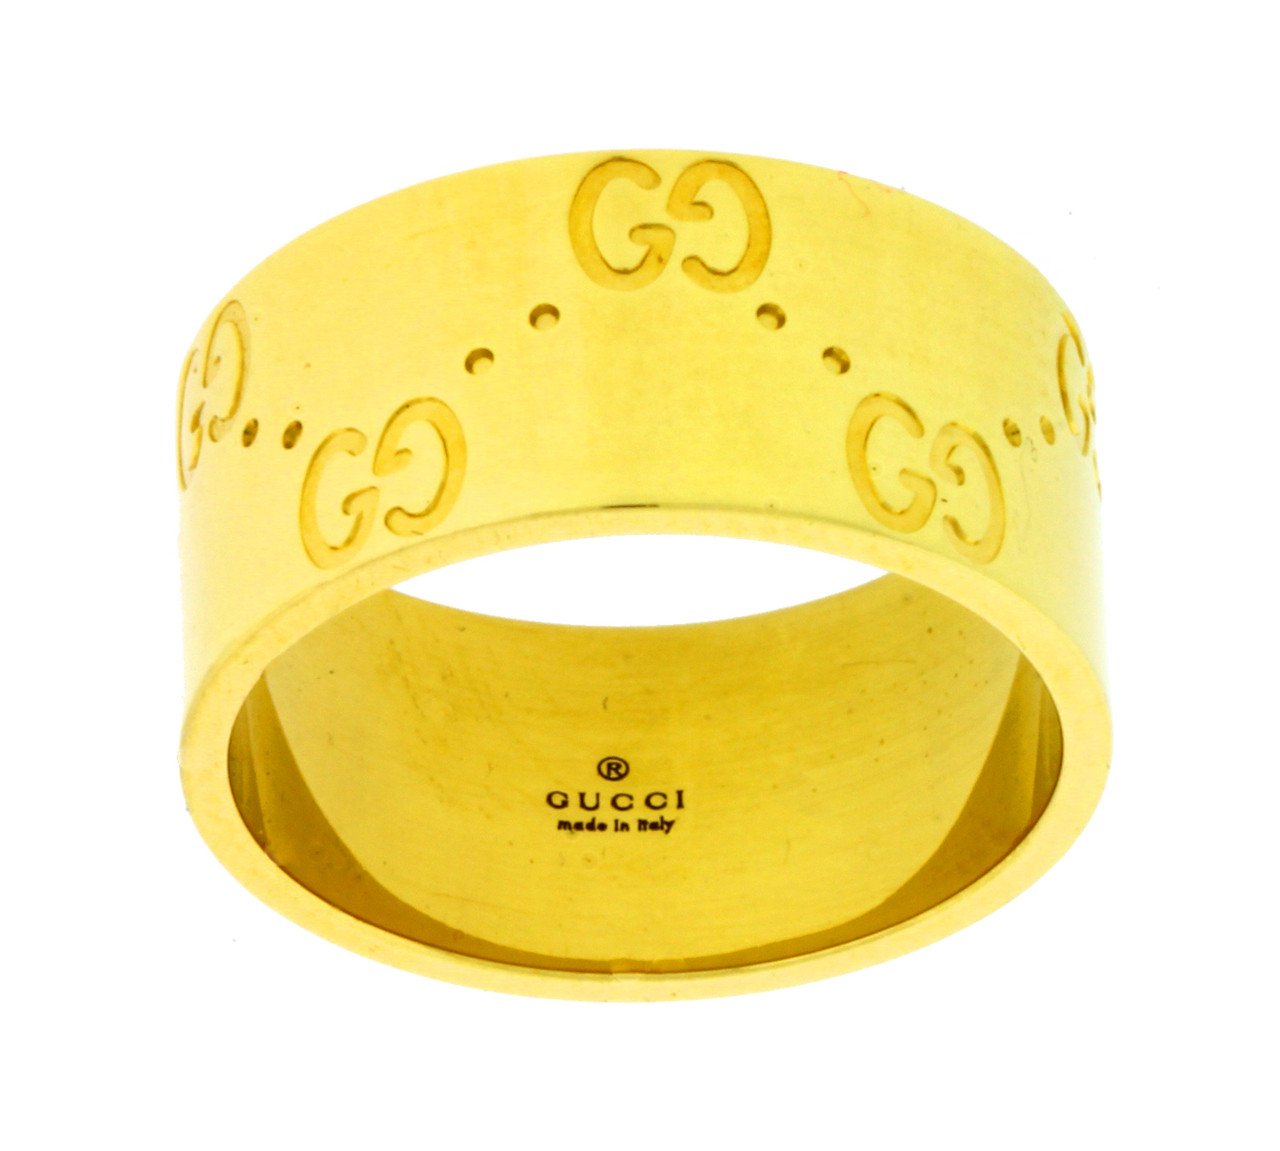 Gucci Icon band ring in 18k yellow gold new in Gucci box Size 11 USA 